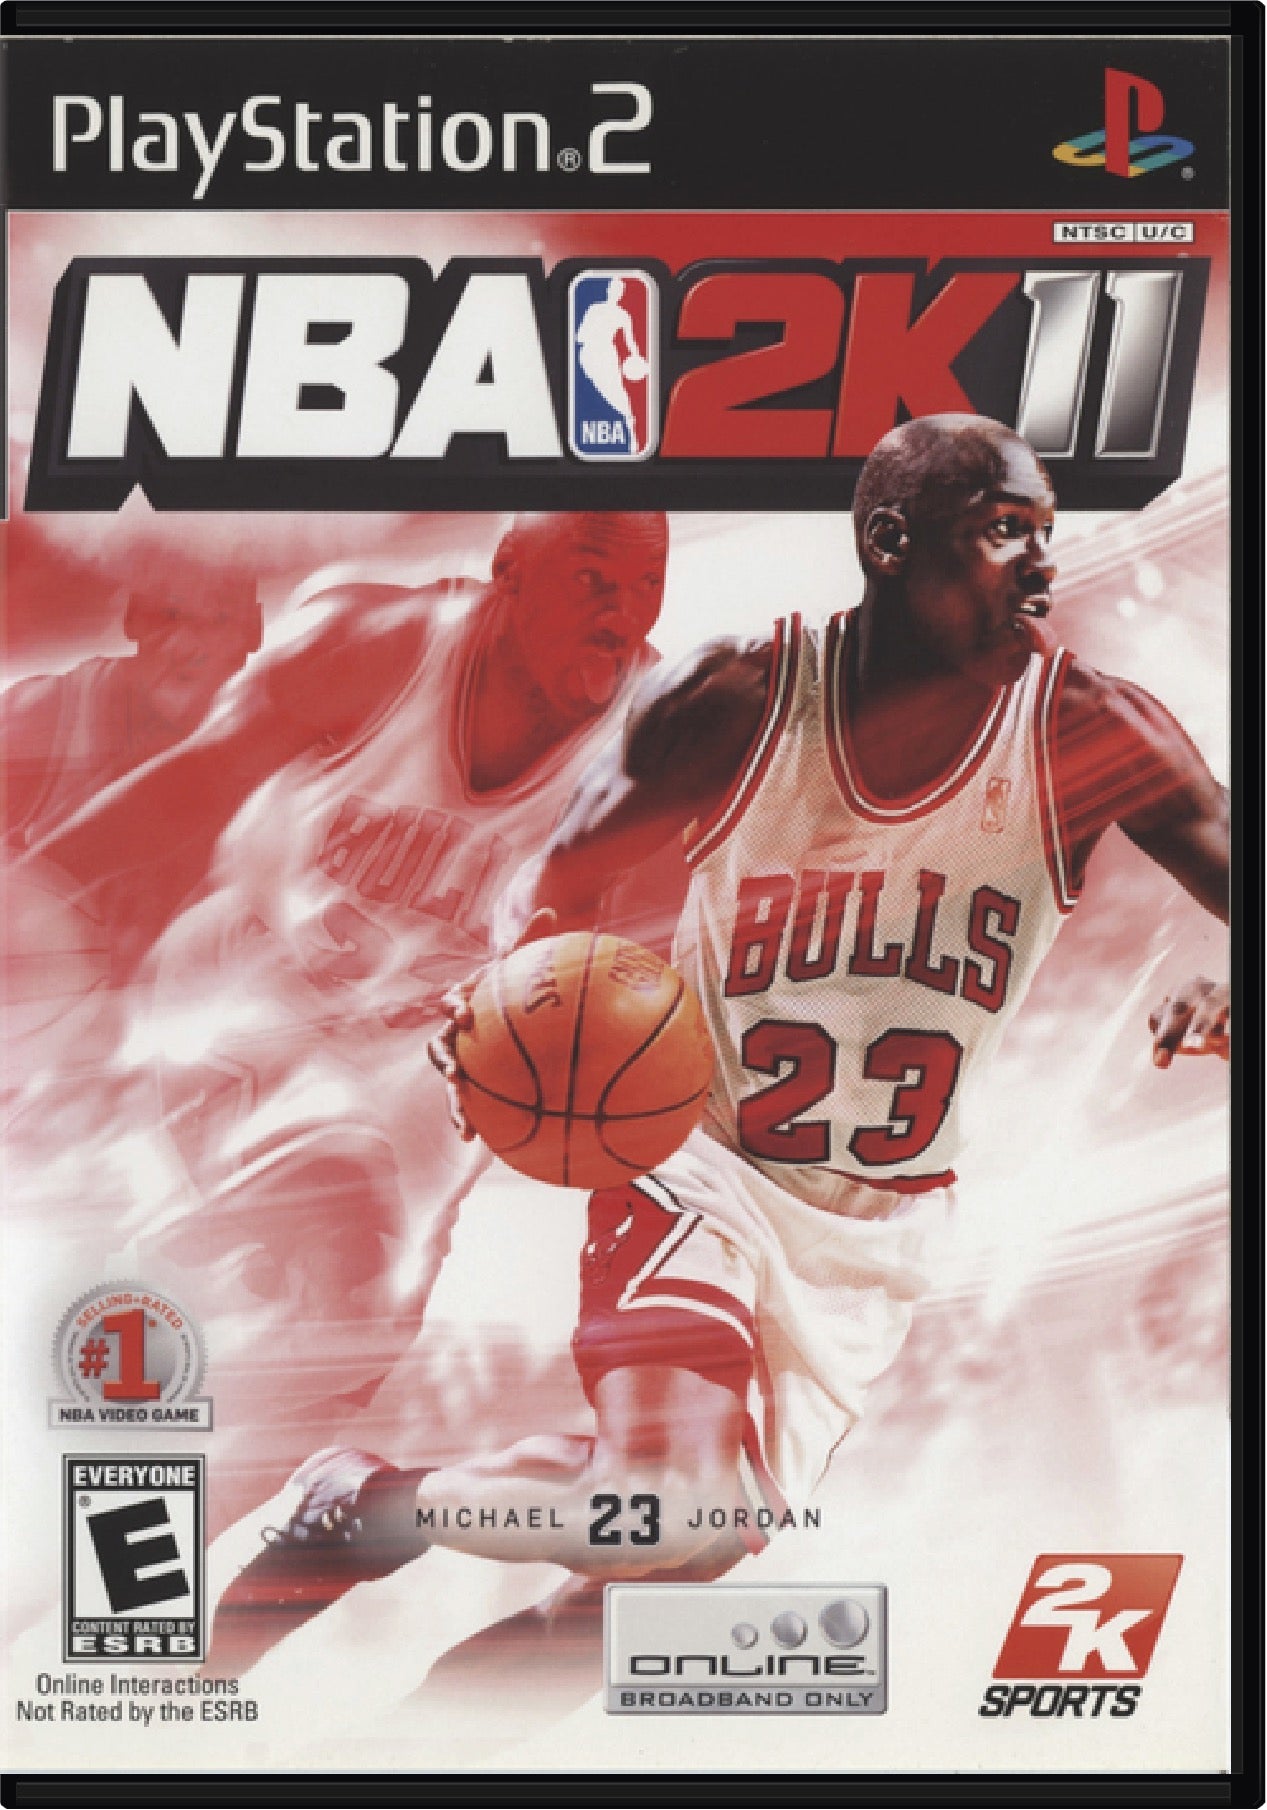 NBA 2K11 Cover Art and Product Photo